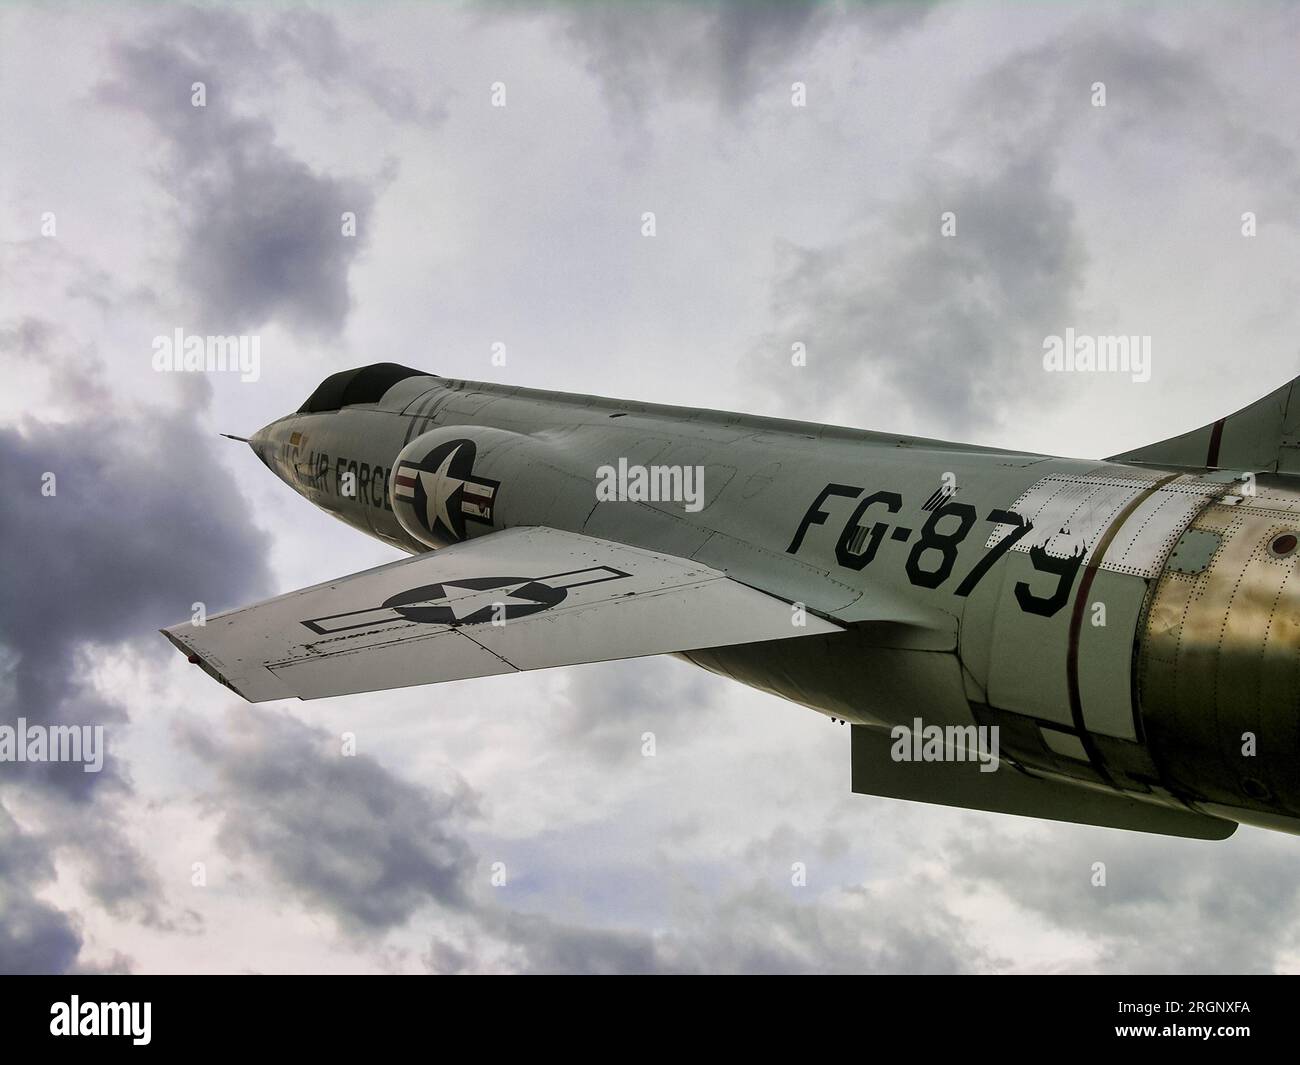 A Lockheed F-104 Starfighter fighter jet is on display at the National Museum of the United States Air Force in Dayton, Ohio. Stock Photo